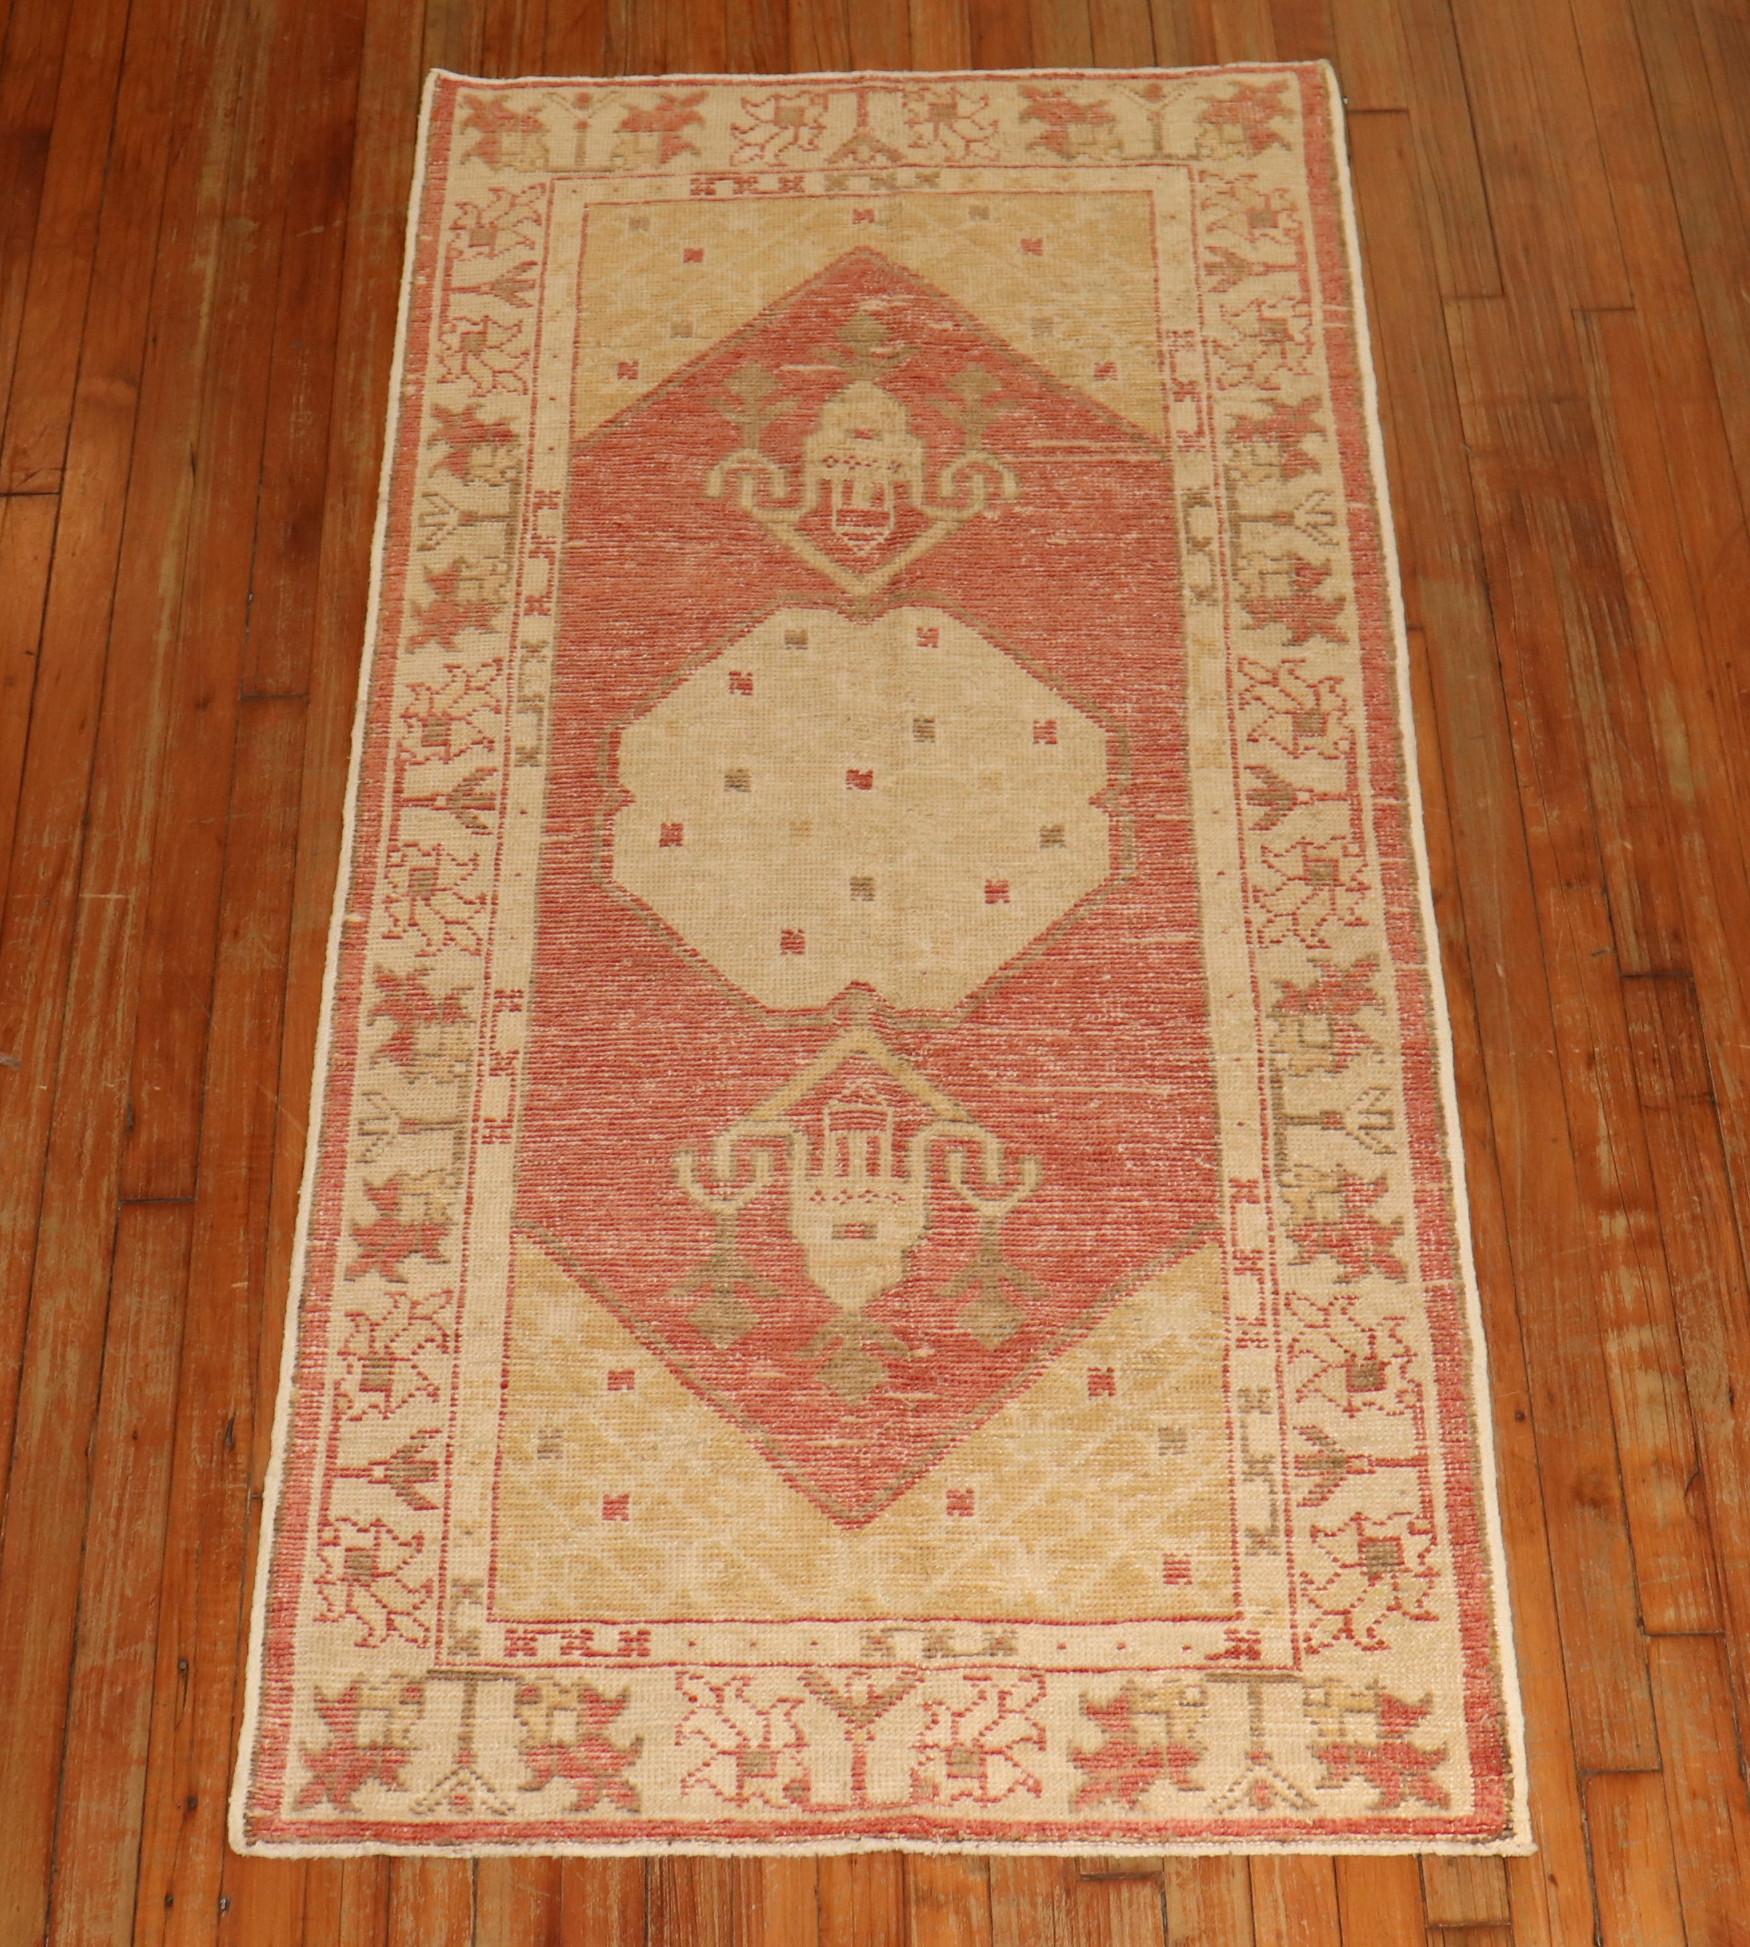 Scatter size vintage Turkish Oushak rug with medallion and border motif with a soft red field butterscotch, beige, light brown, ivory accents.

Measures: 2'10'' x 5'8''.